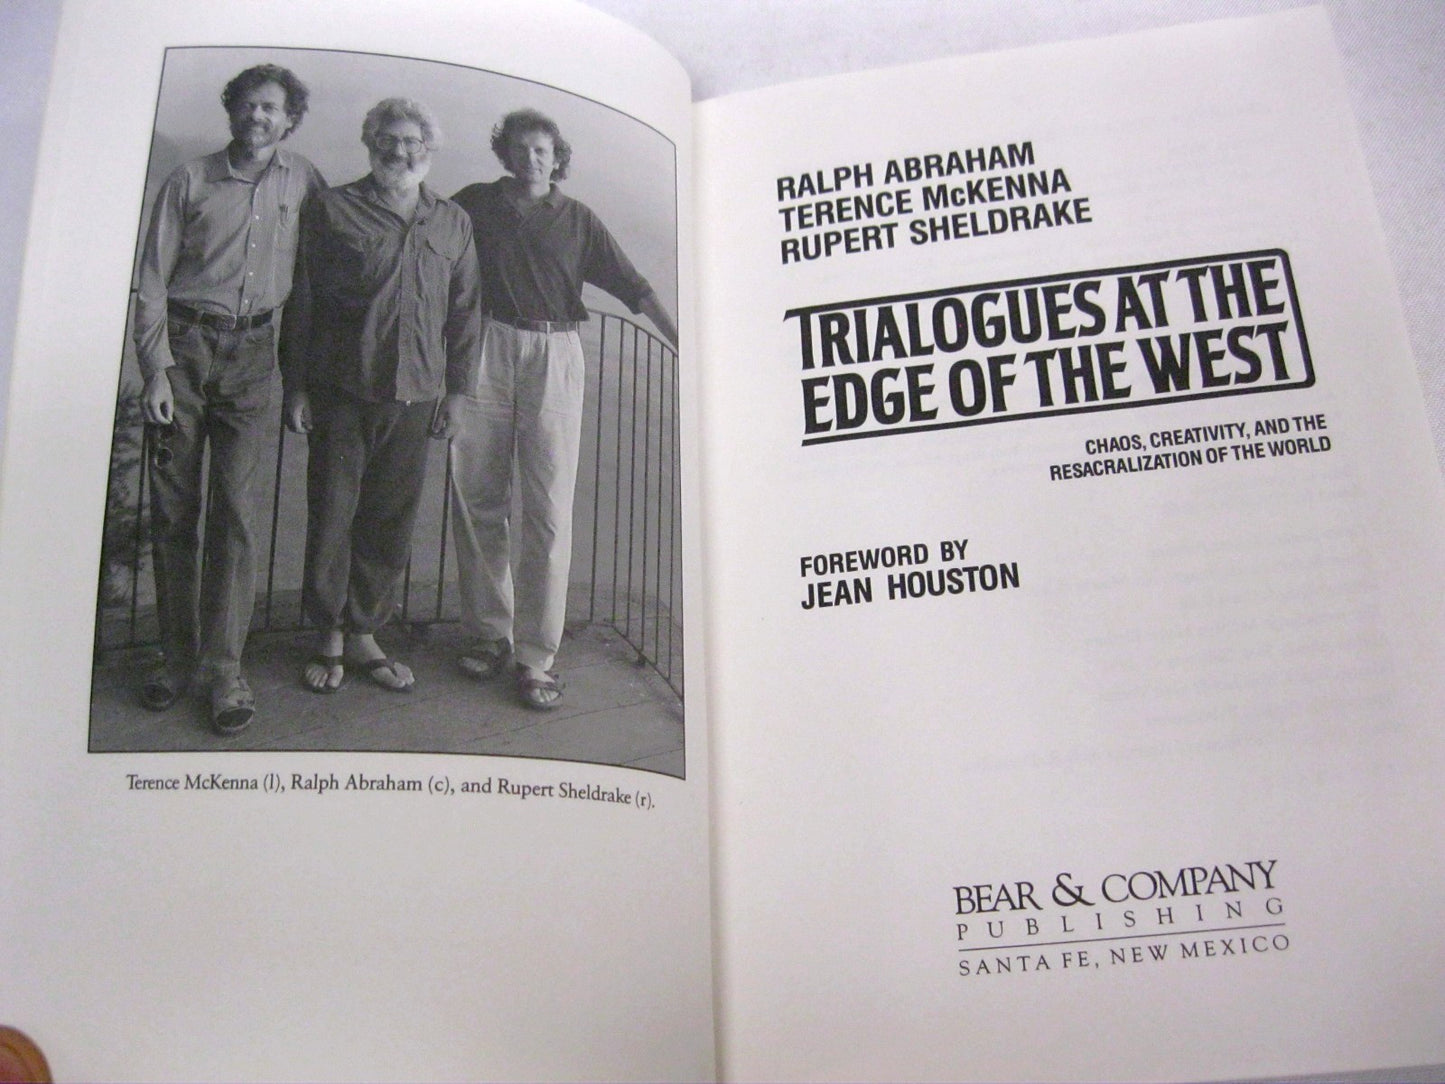 Trialogues At The Edge of the West by Ralph Abraham, Terence McKenna, and Rupert Sheldrake